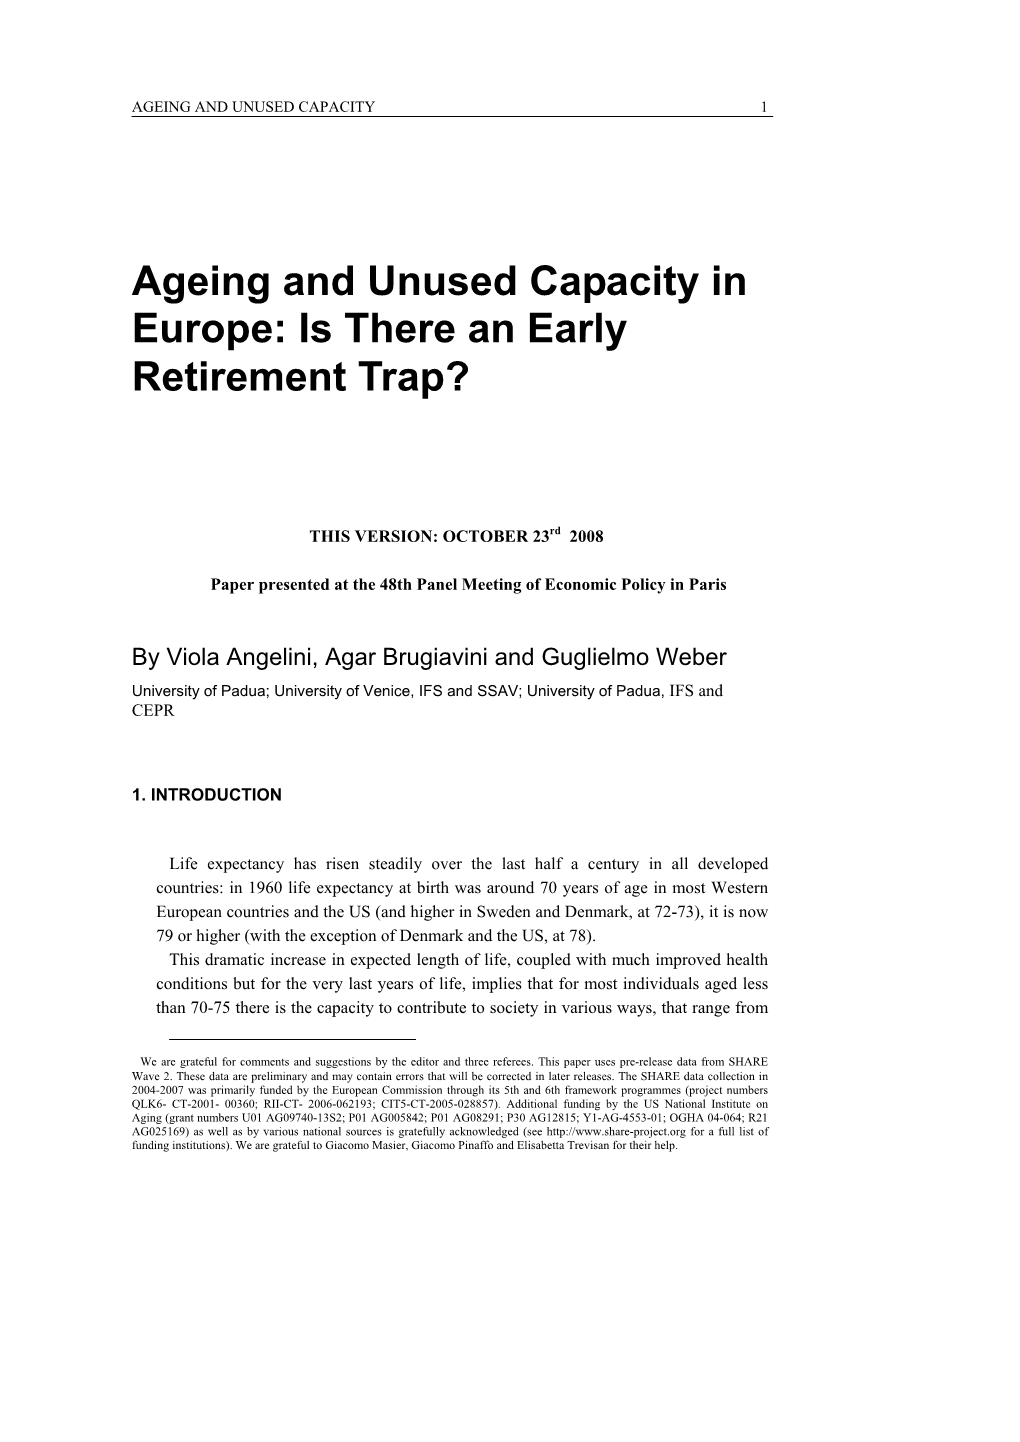 Ageing and Unused Capacity in Europe: Is There an Early Retirement Trap? 